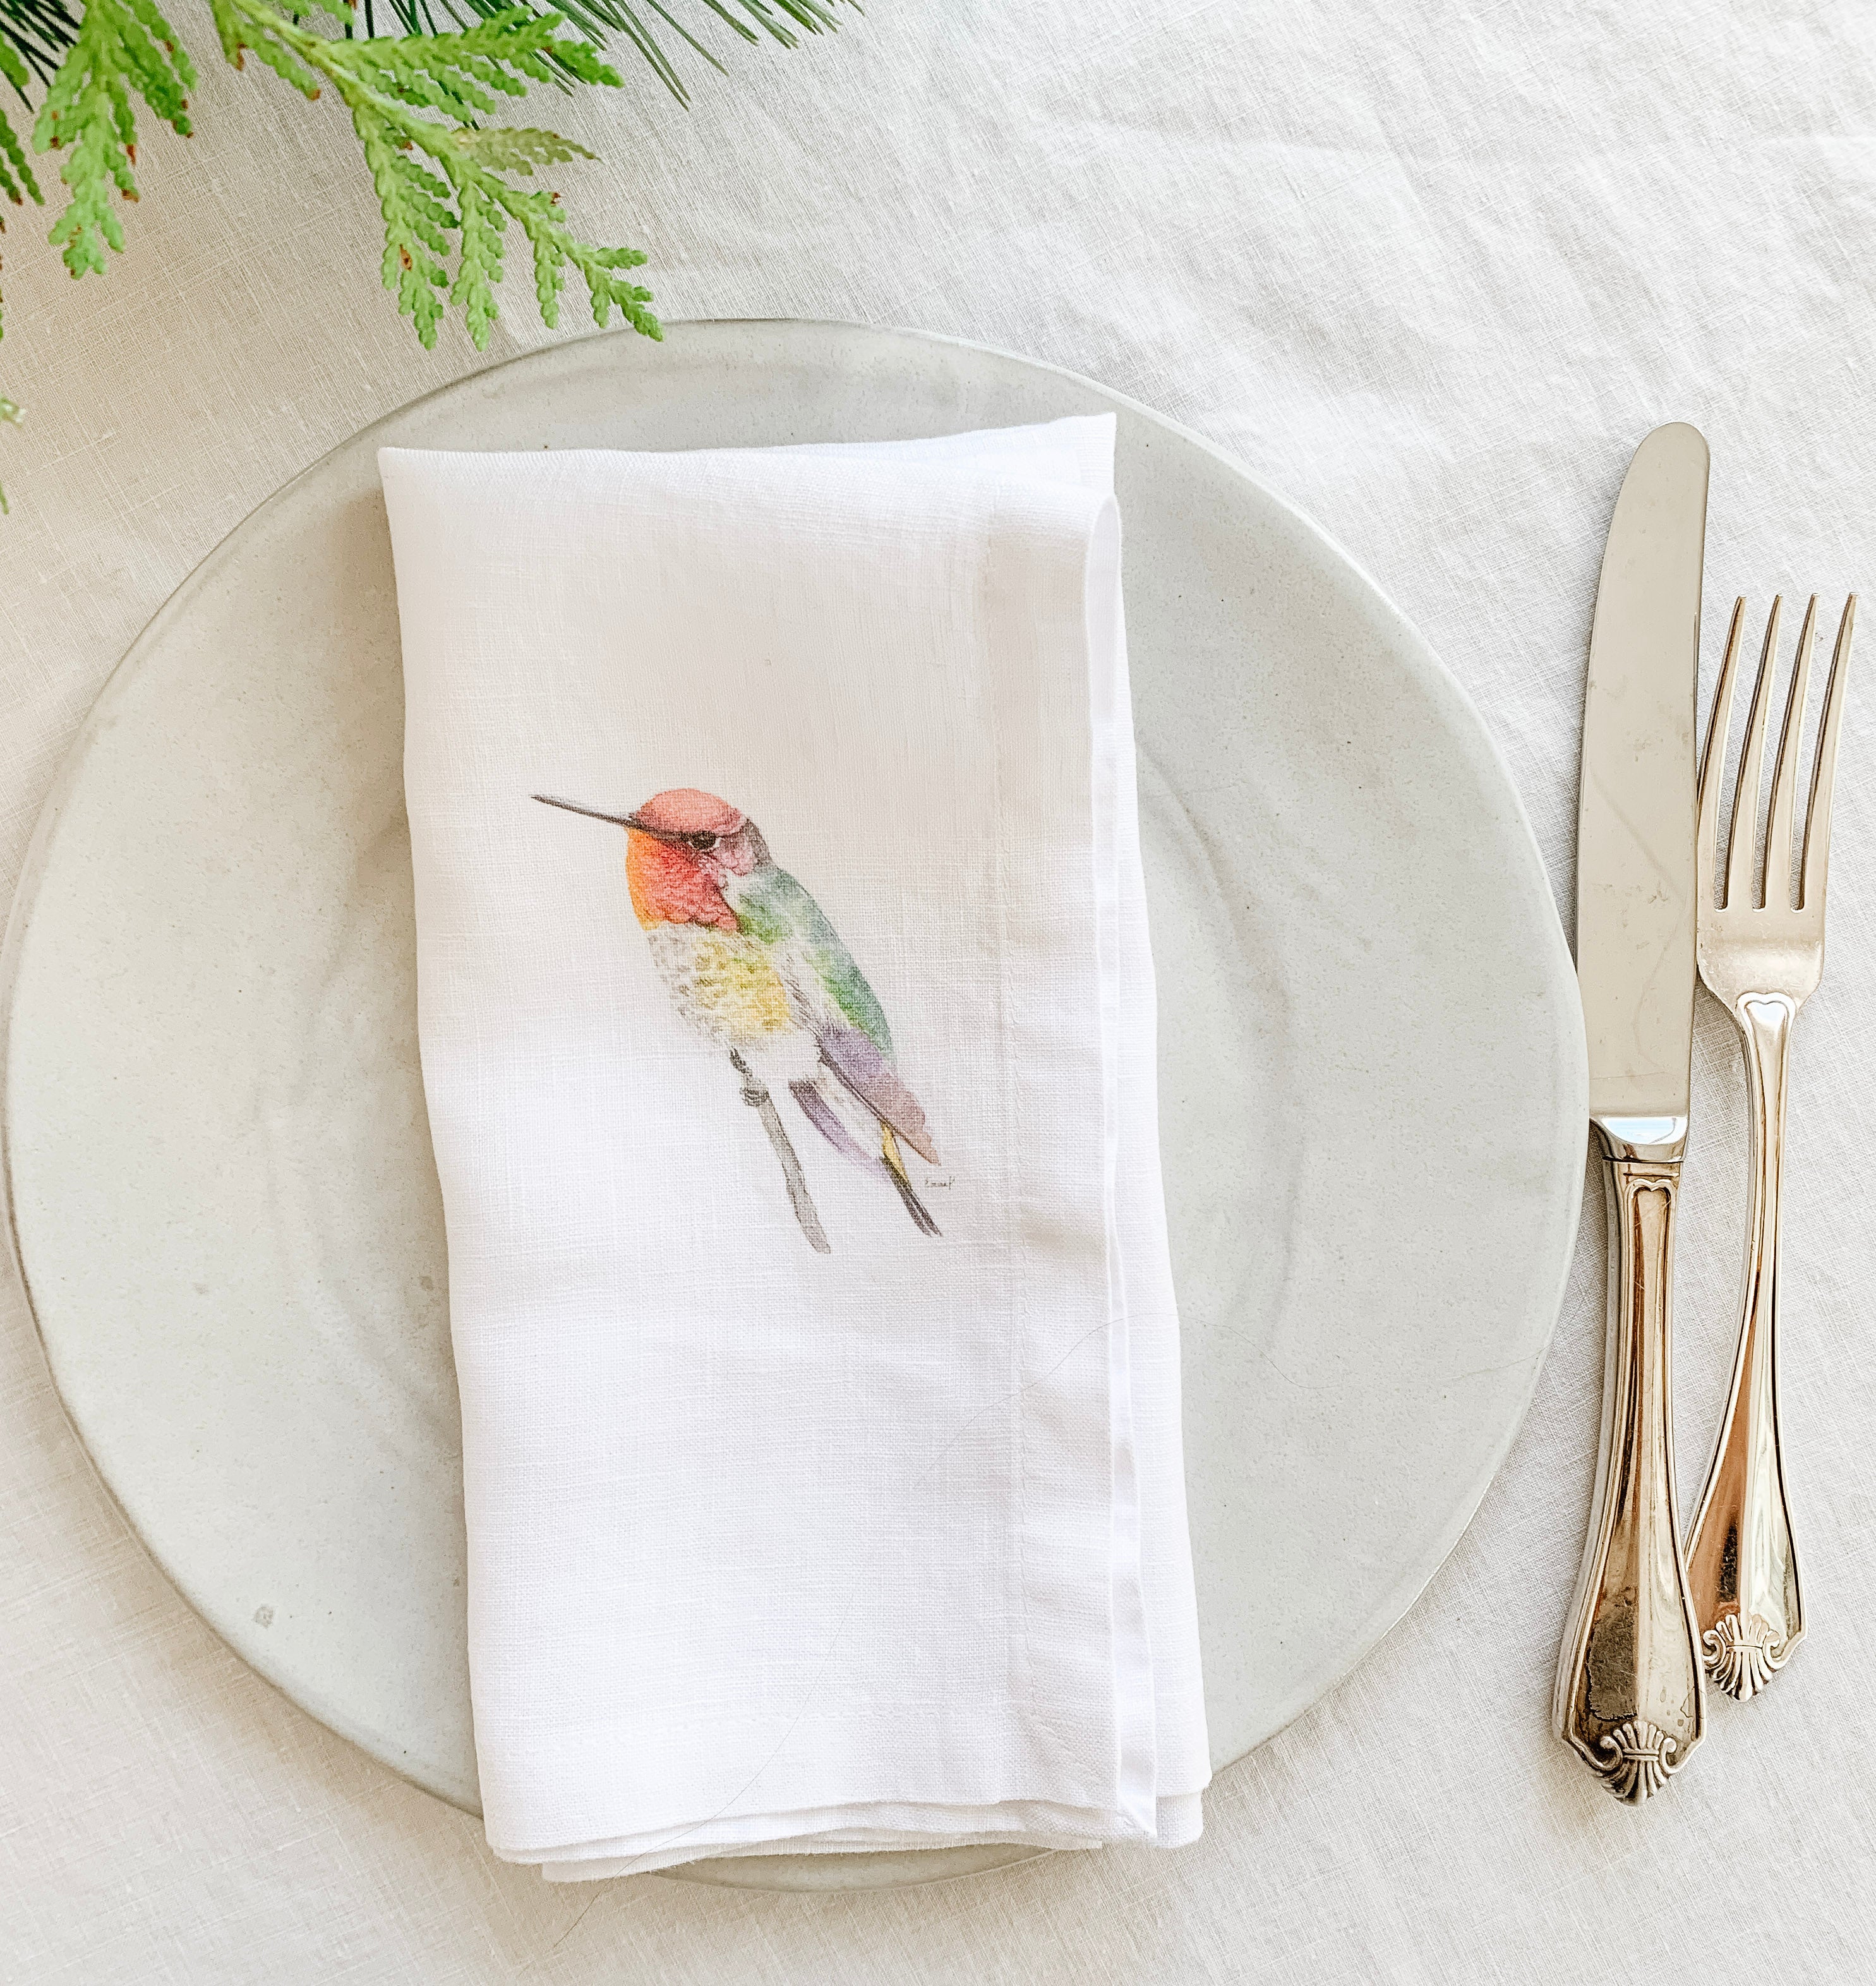 Set of four French Linen napkins with Anna's, Rufous, Ruby and Orange headed hummingbird